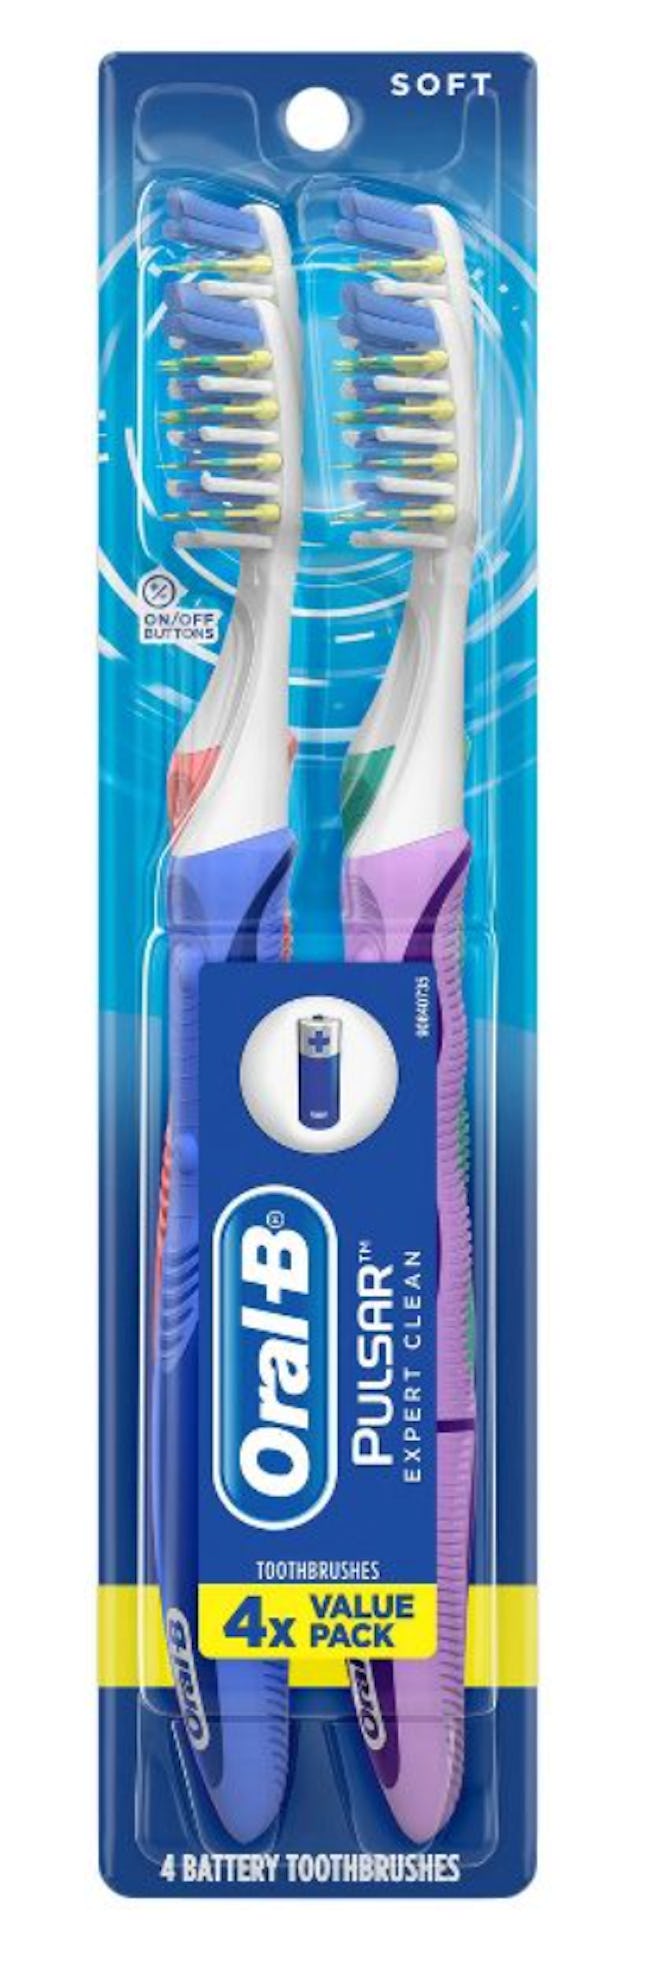 The Oral B Pulsar Manual Toothbrush is one of the best sex toys for moms.